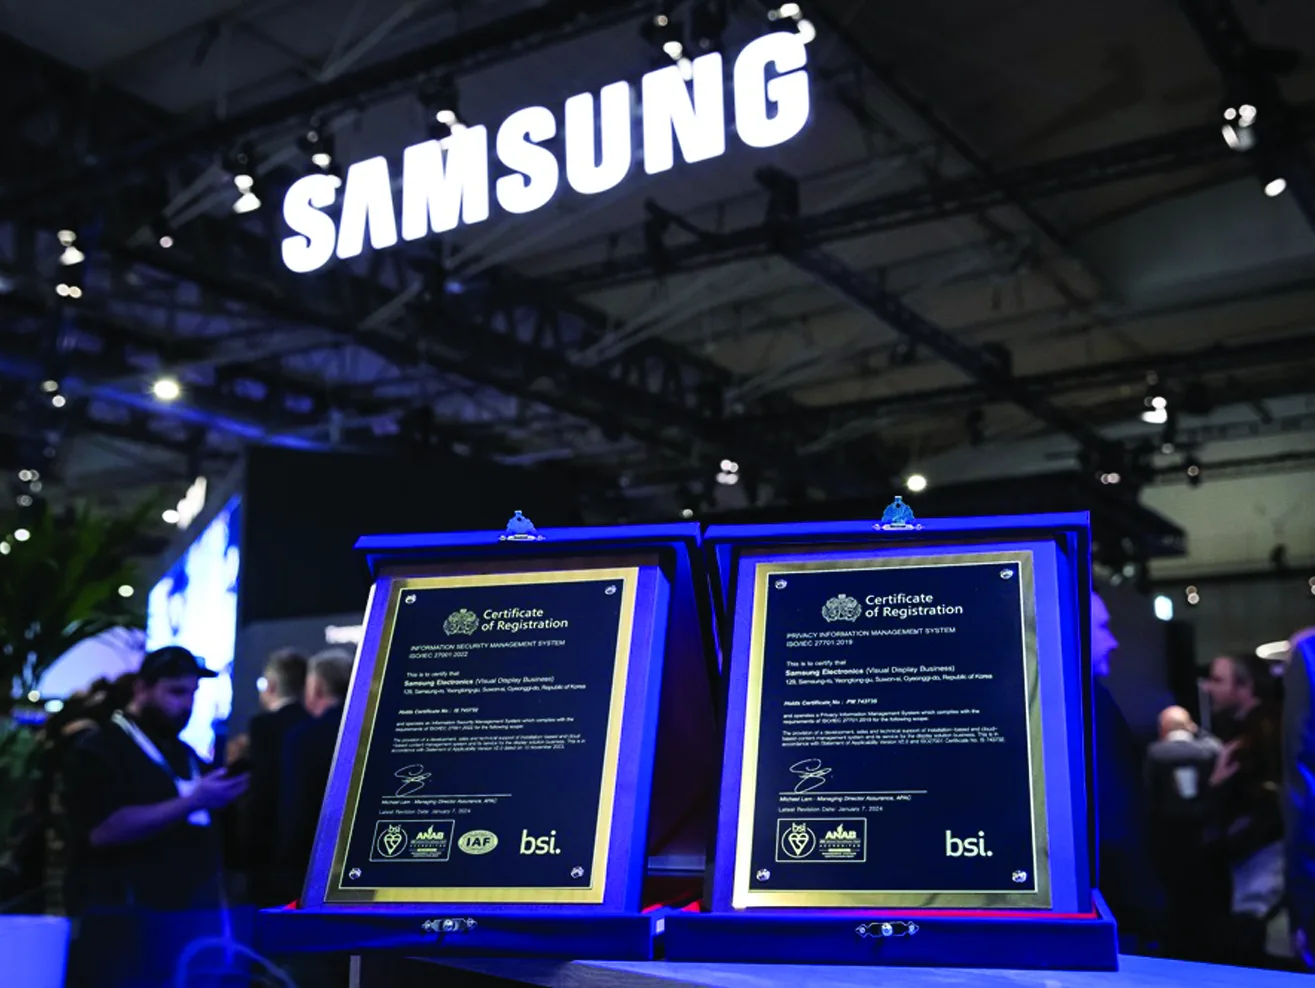 samsung's digital signage systems awarded iso security certifications